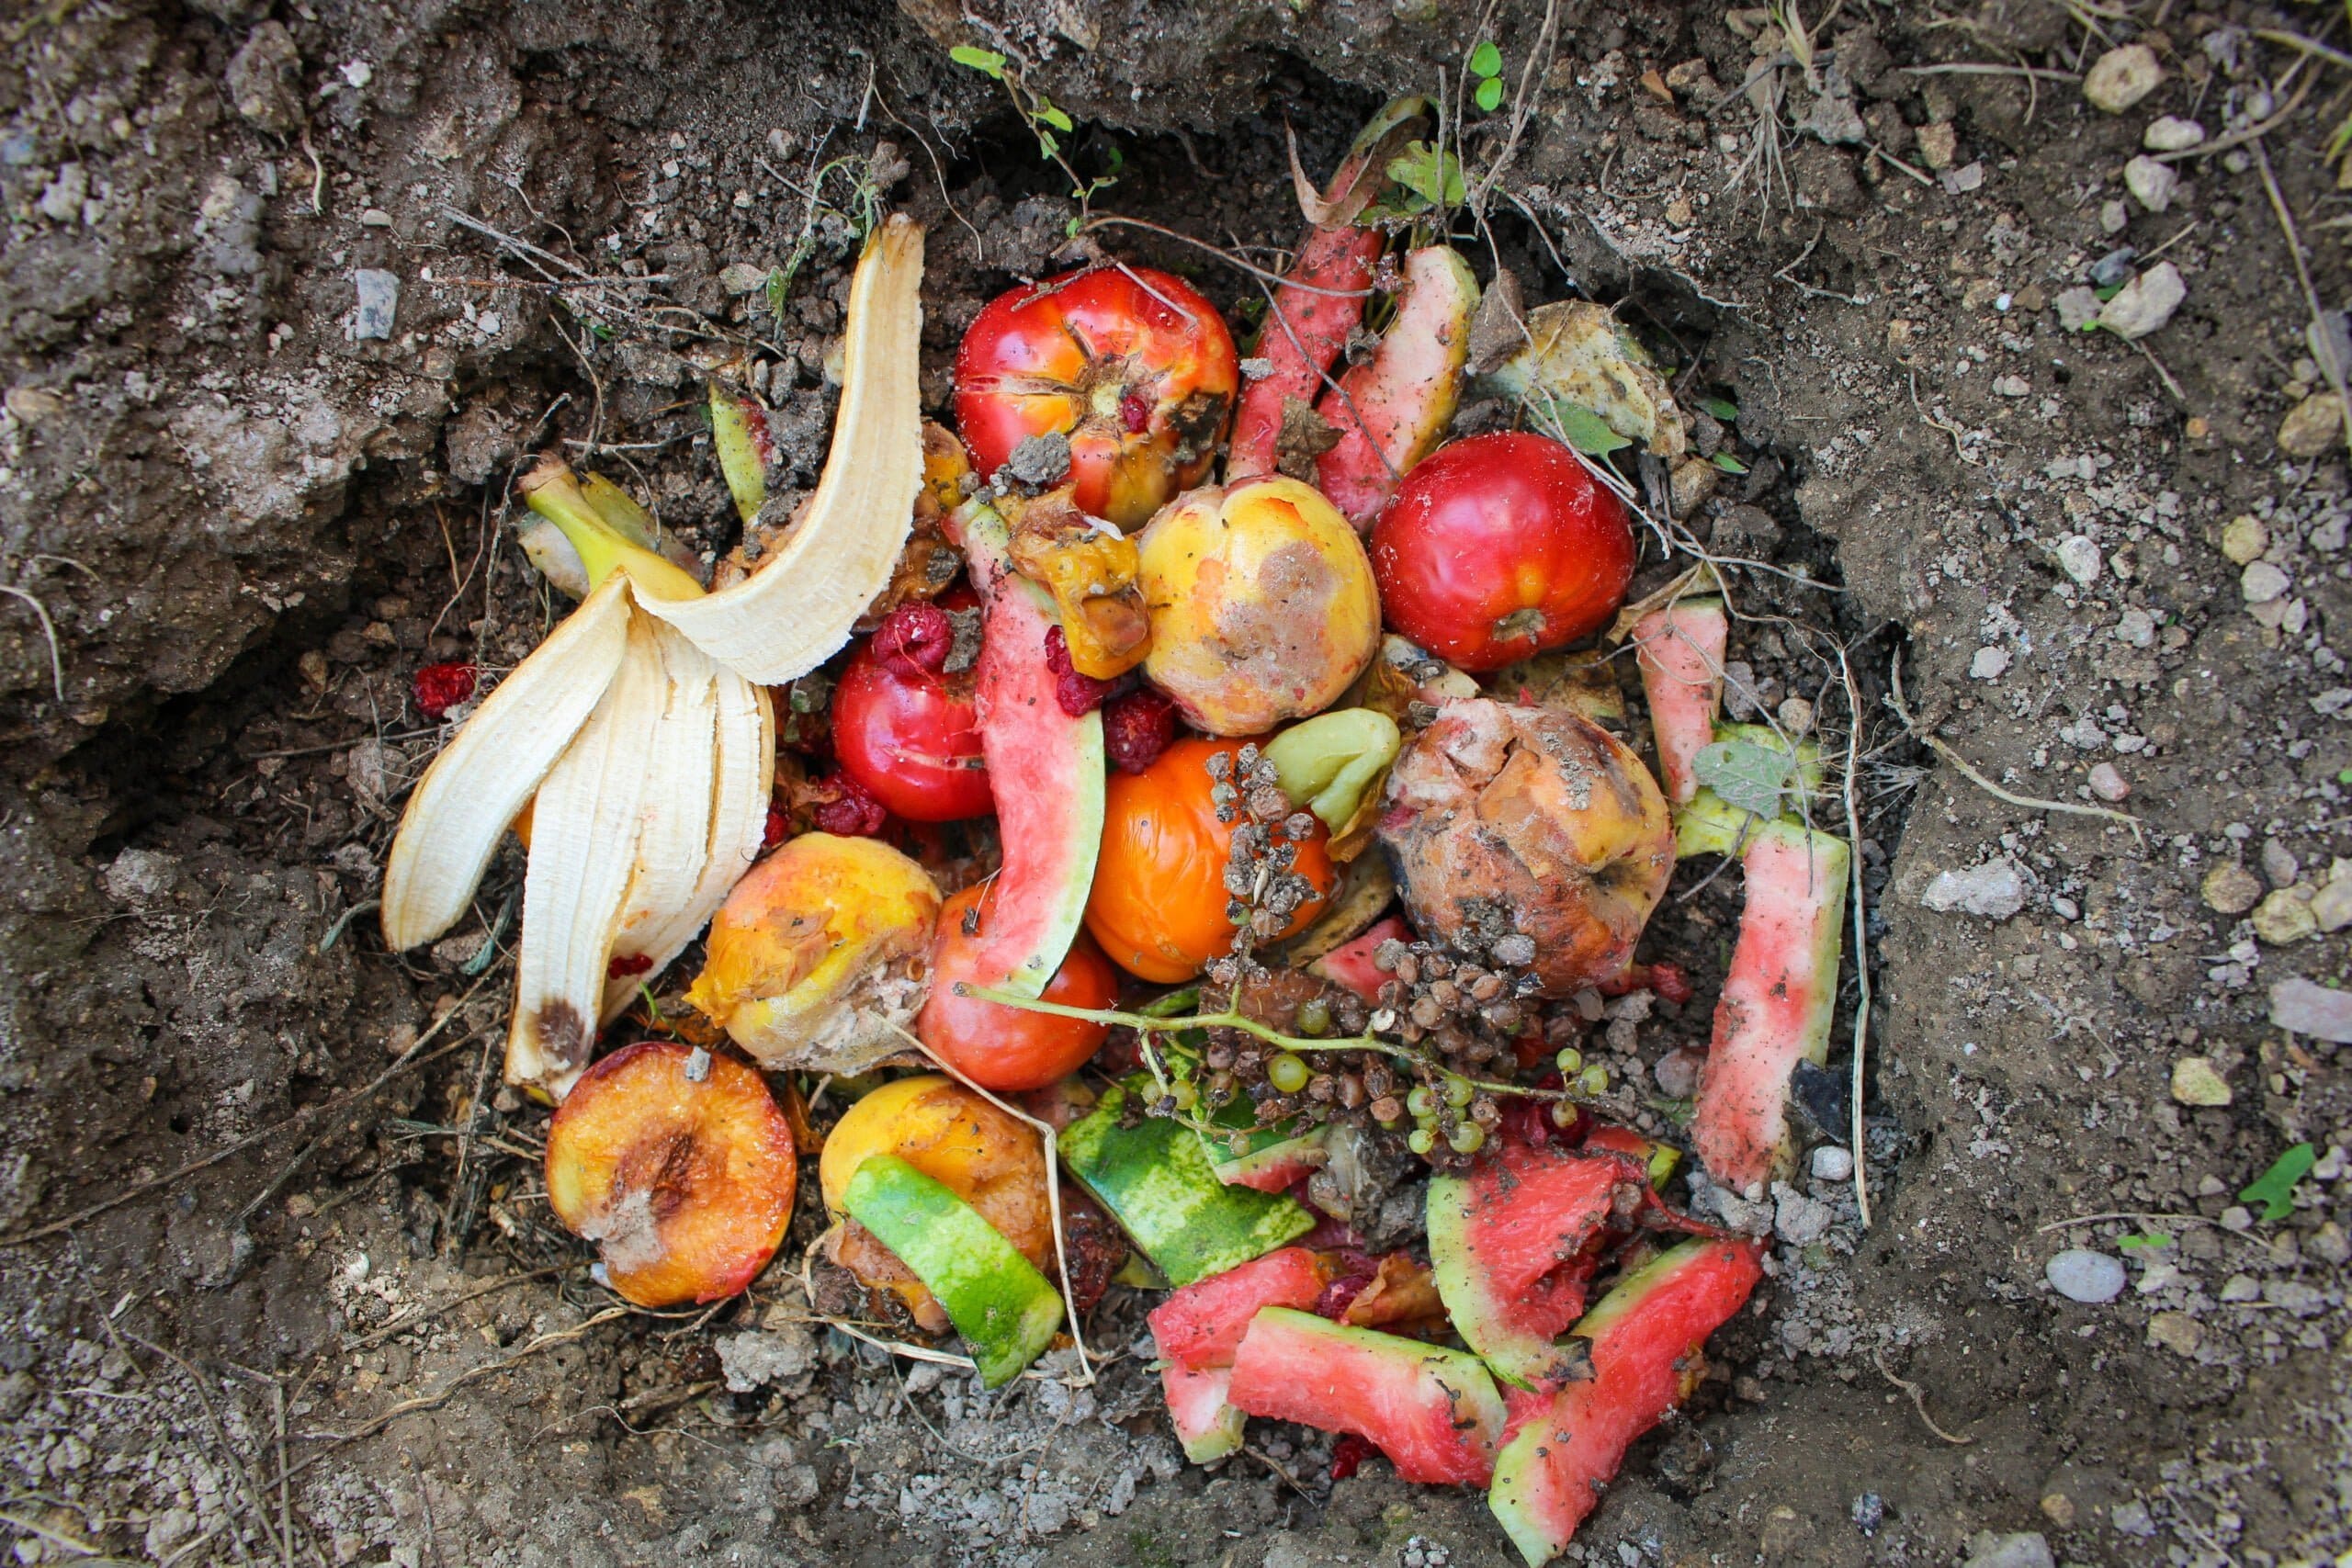 Compost Pile of Fruits and Vegetables